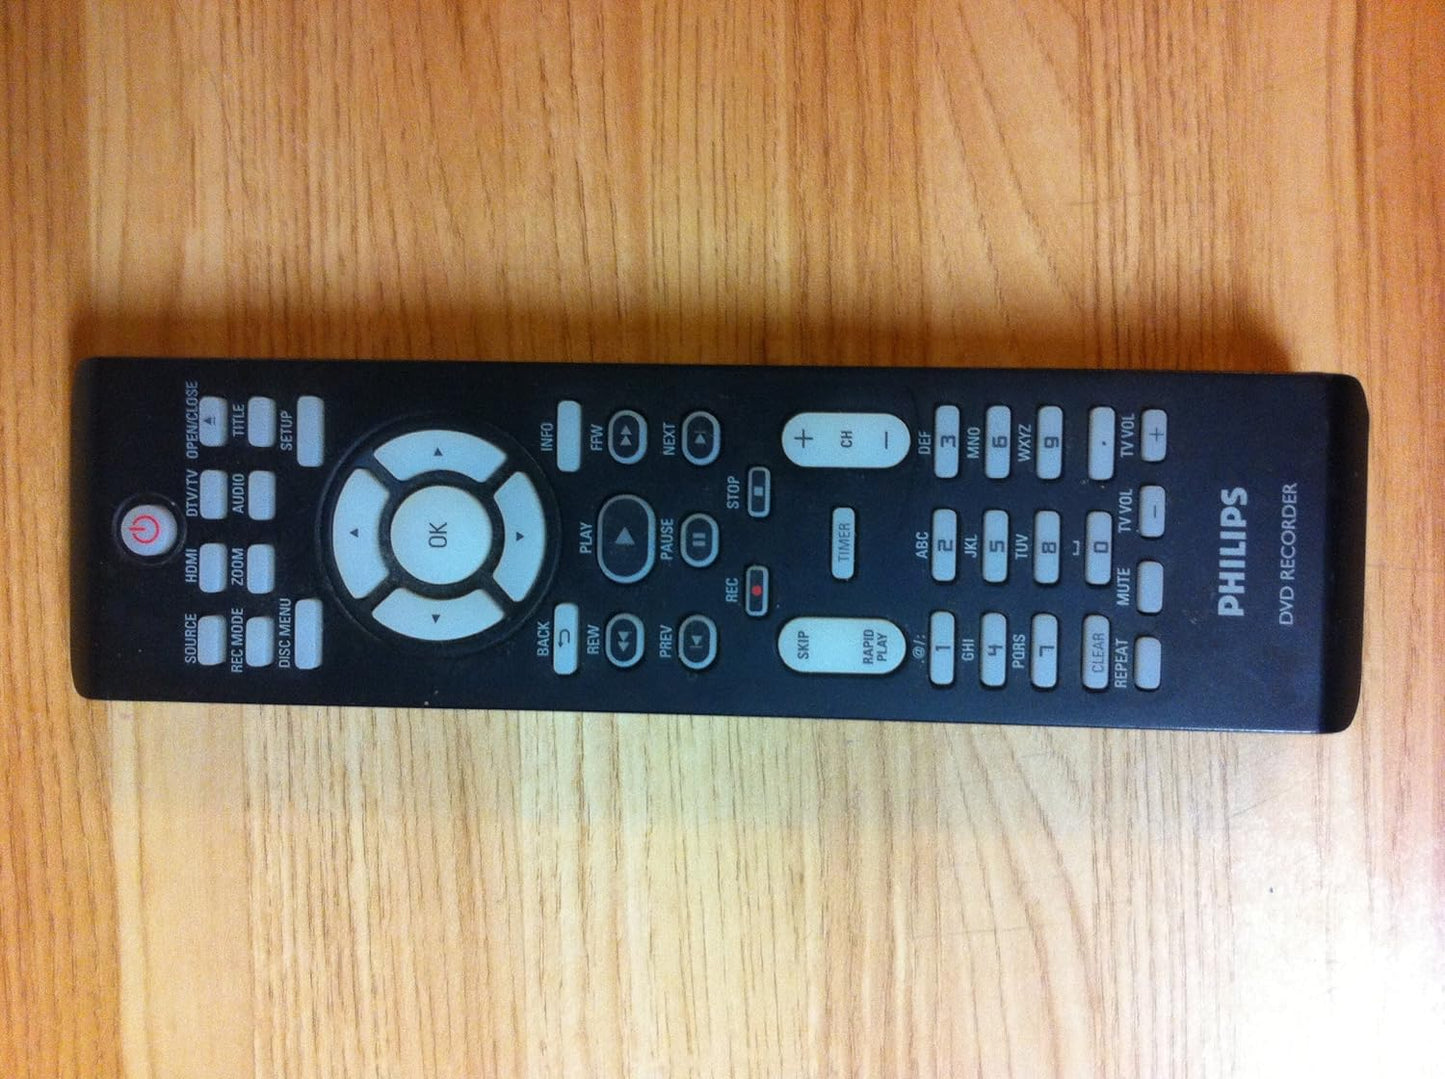 Replacement Remote Control for Philips DVDR3576H37, 996510003026, DVDR3575H37, DVDR3575H